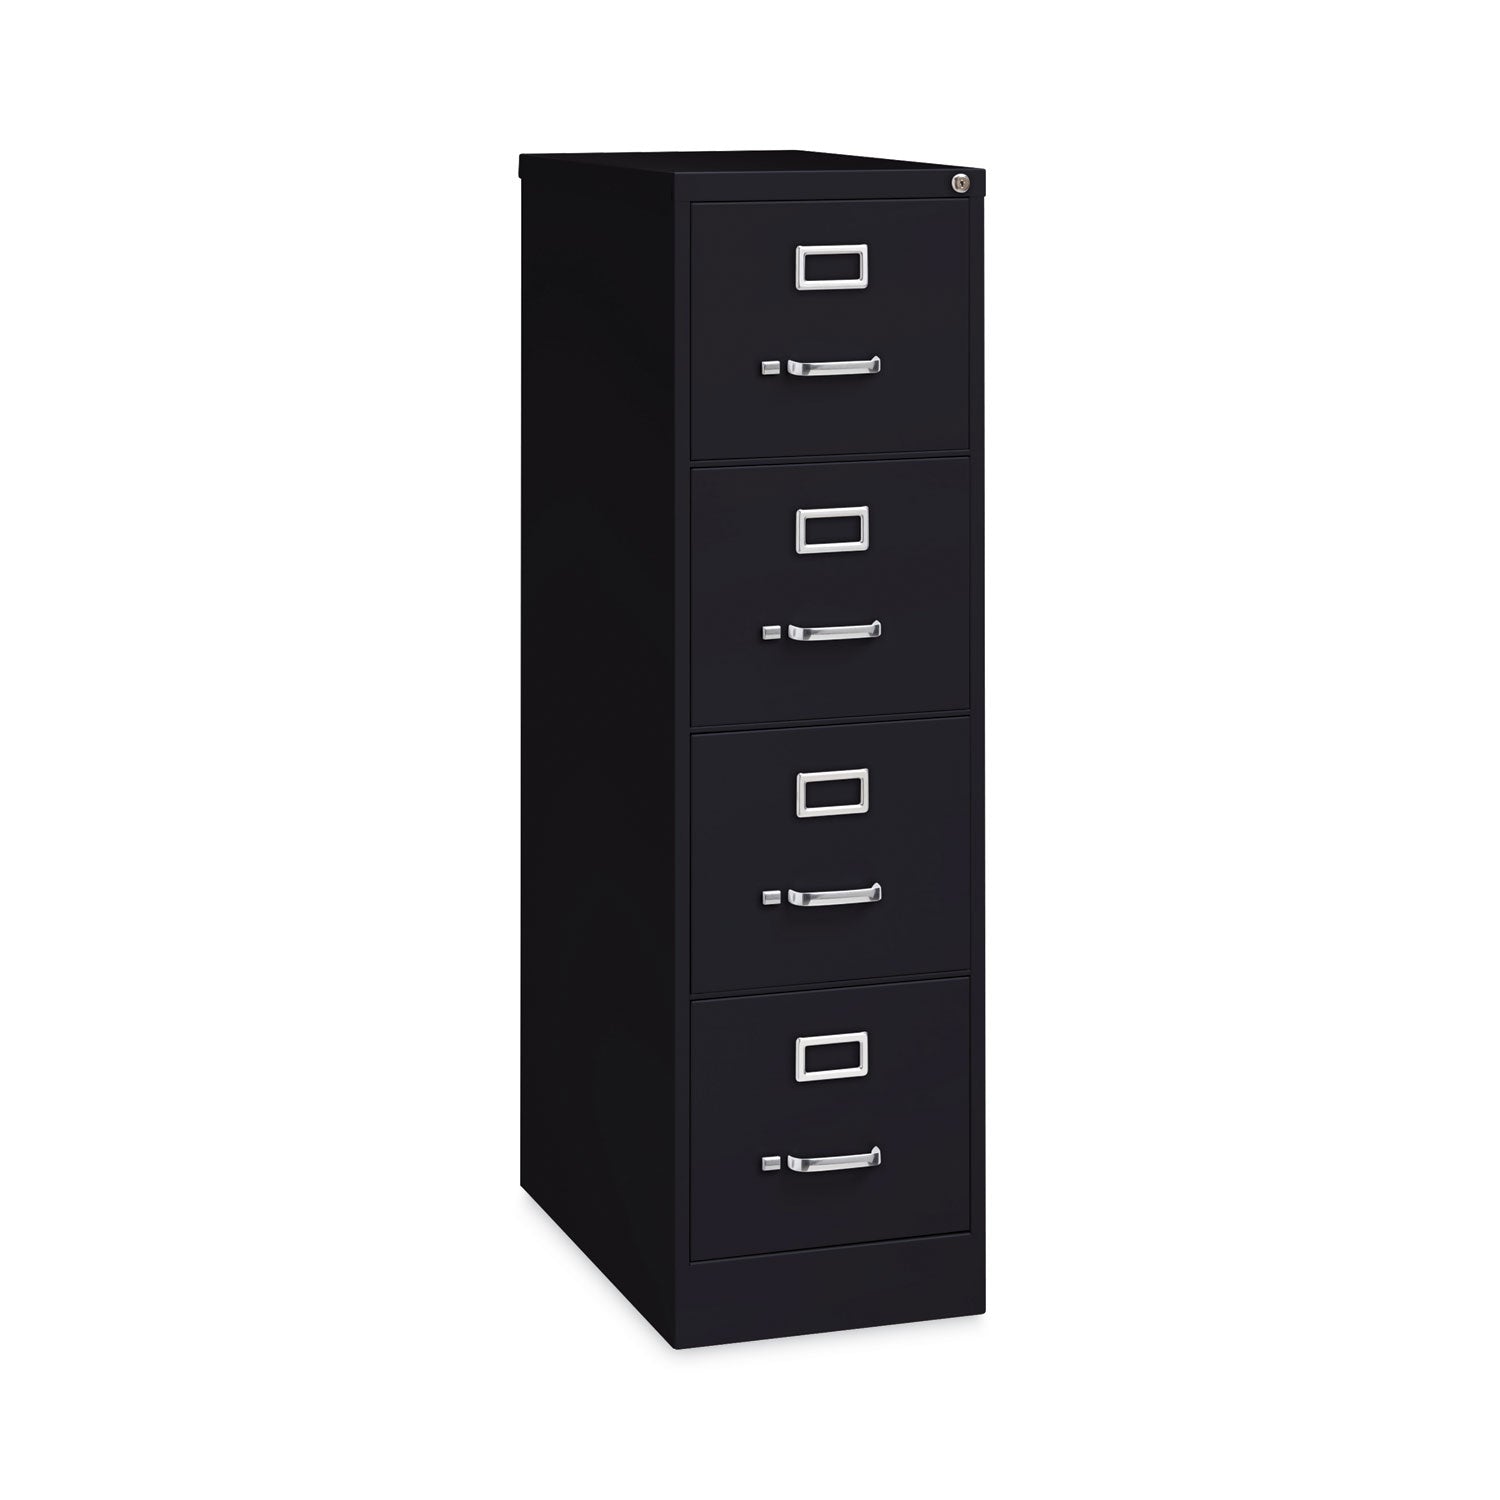 vertical-letter-file-cabinet-4-letter-size-file-drawers-black-15-x-265-x-52_hid14105 - 3